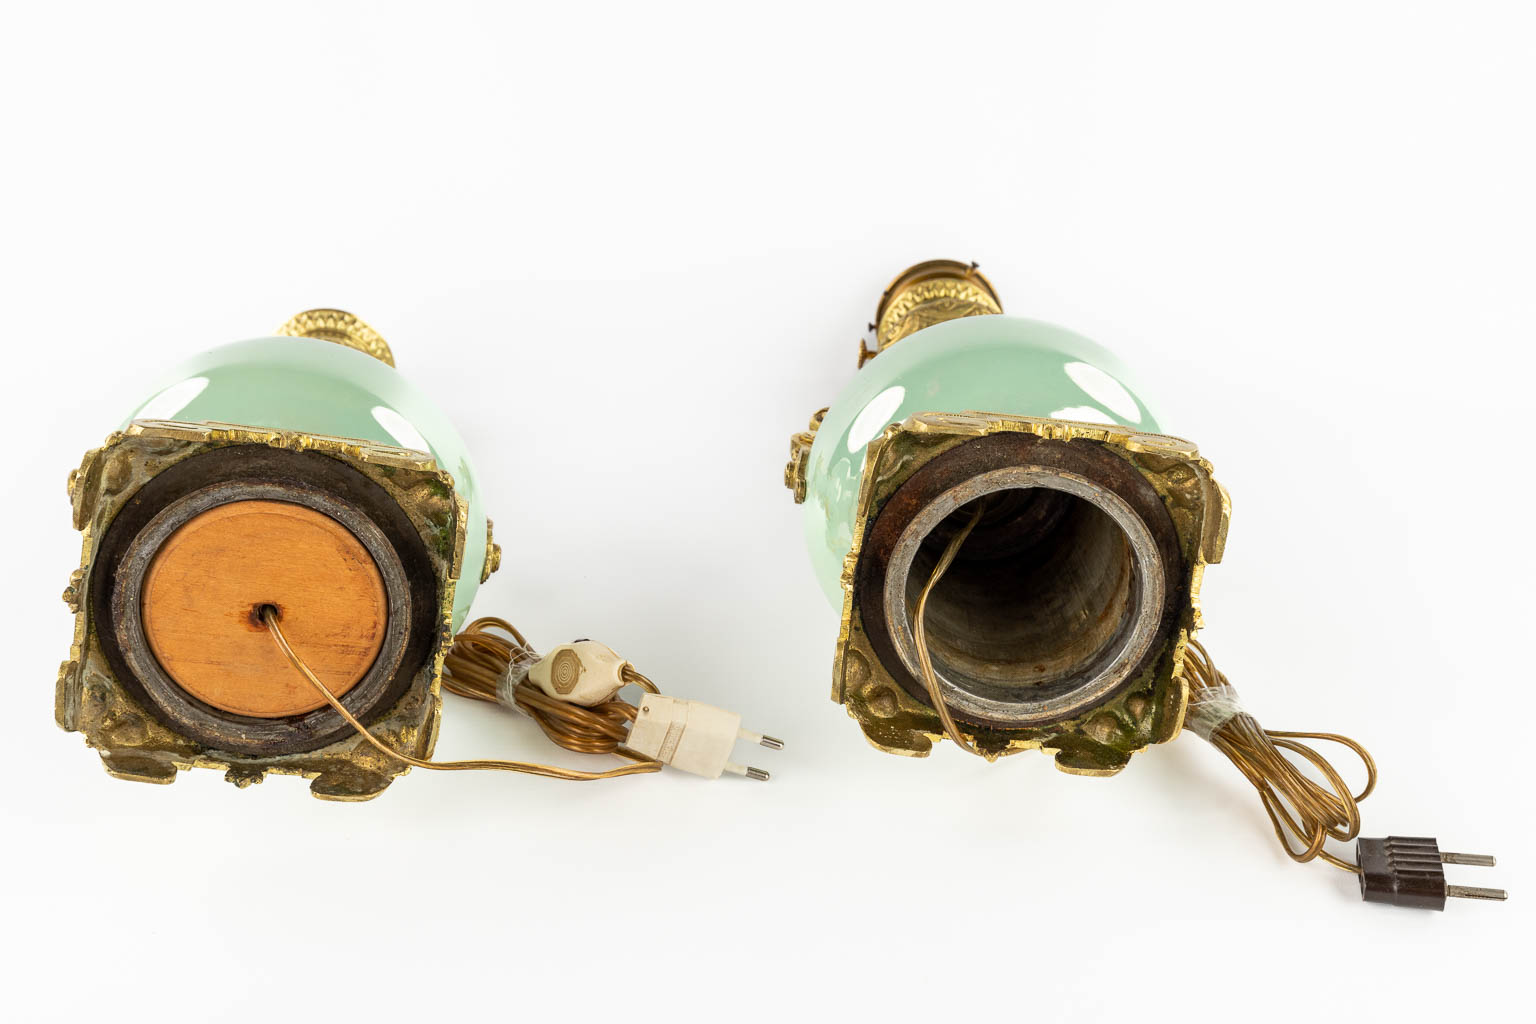 A pair of oil lamps, earthenware with a luster glaze and mounted with bronze. 20th C. (D:16 x W:17 x H:46 cm)